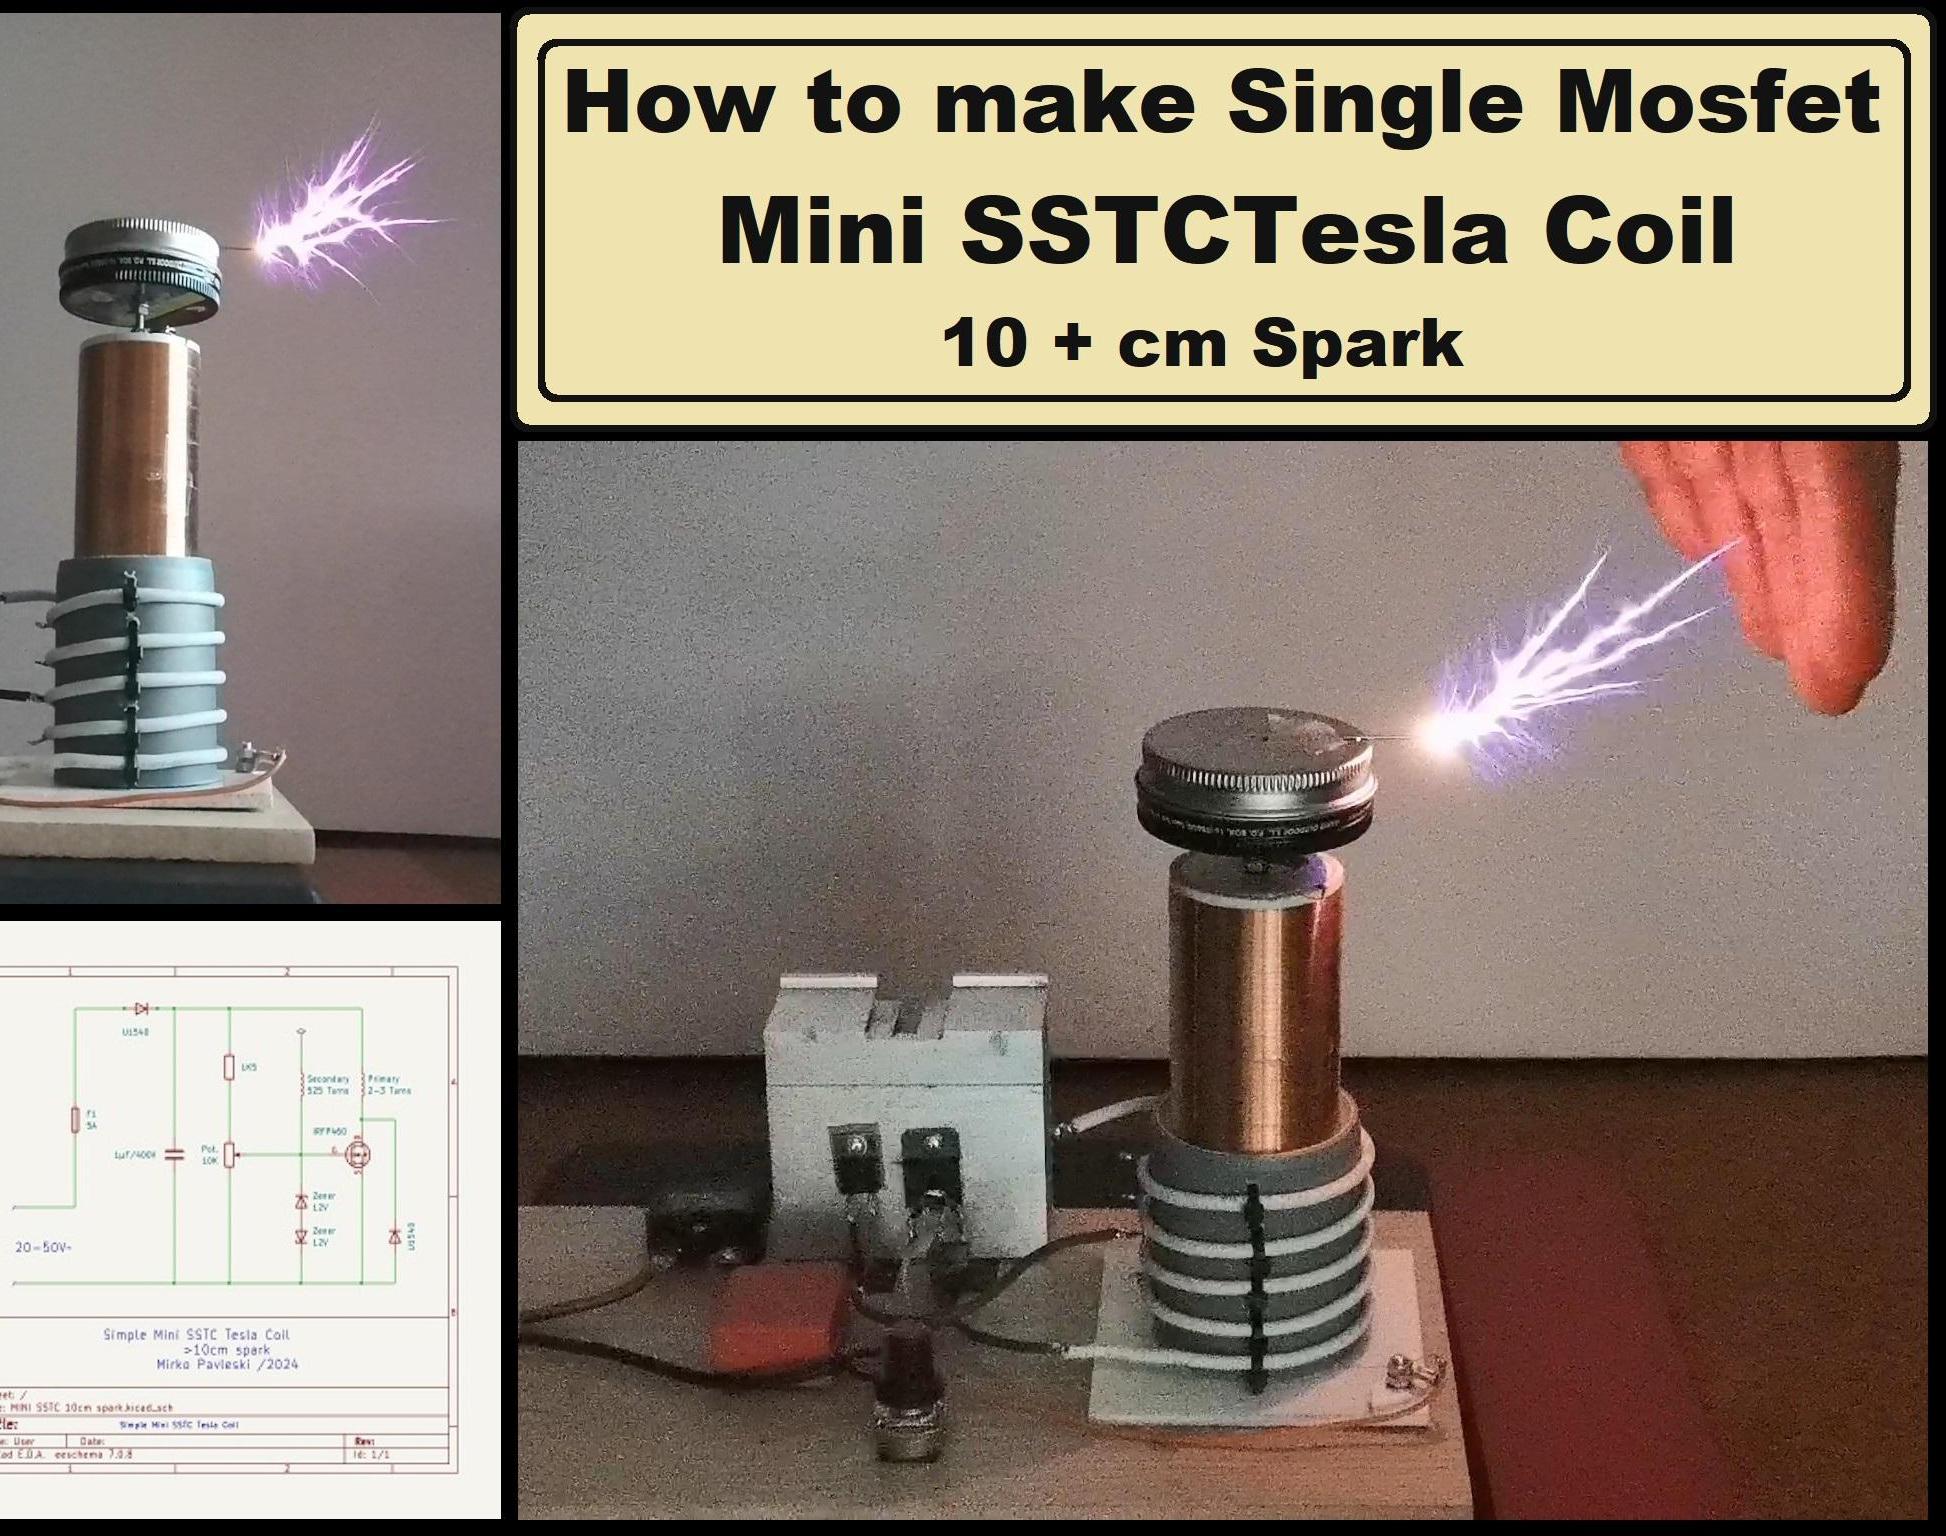 Single Mosfet Mini SSTC Tesla Coil With 10 + Cm Spark